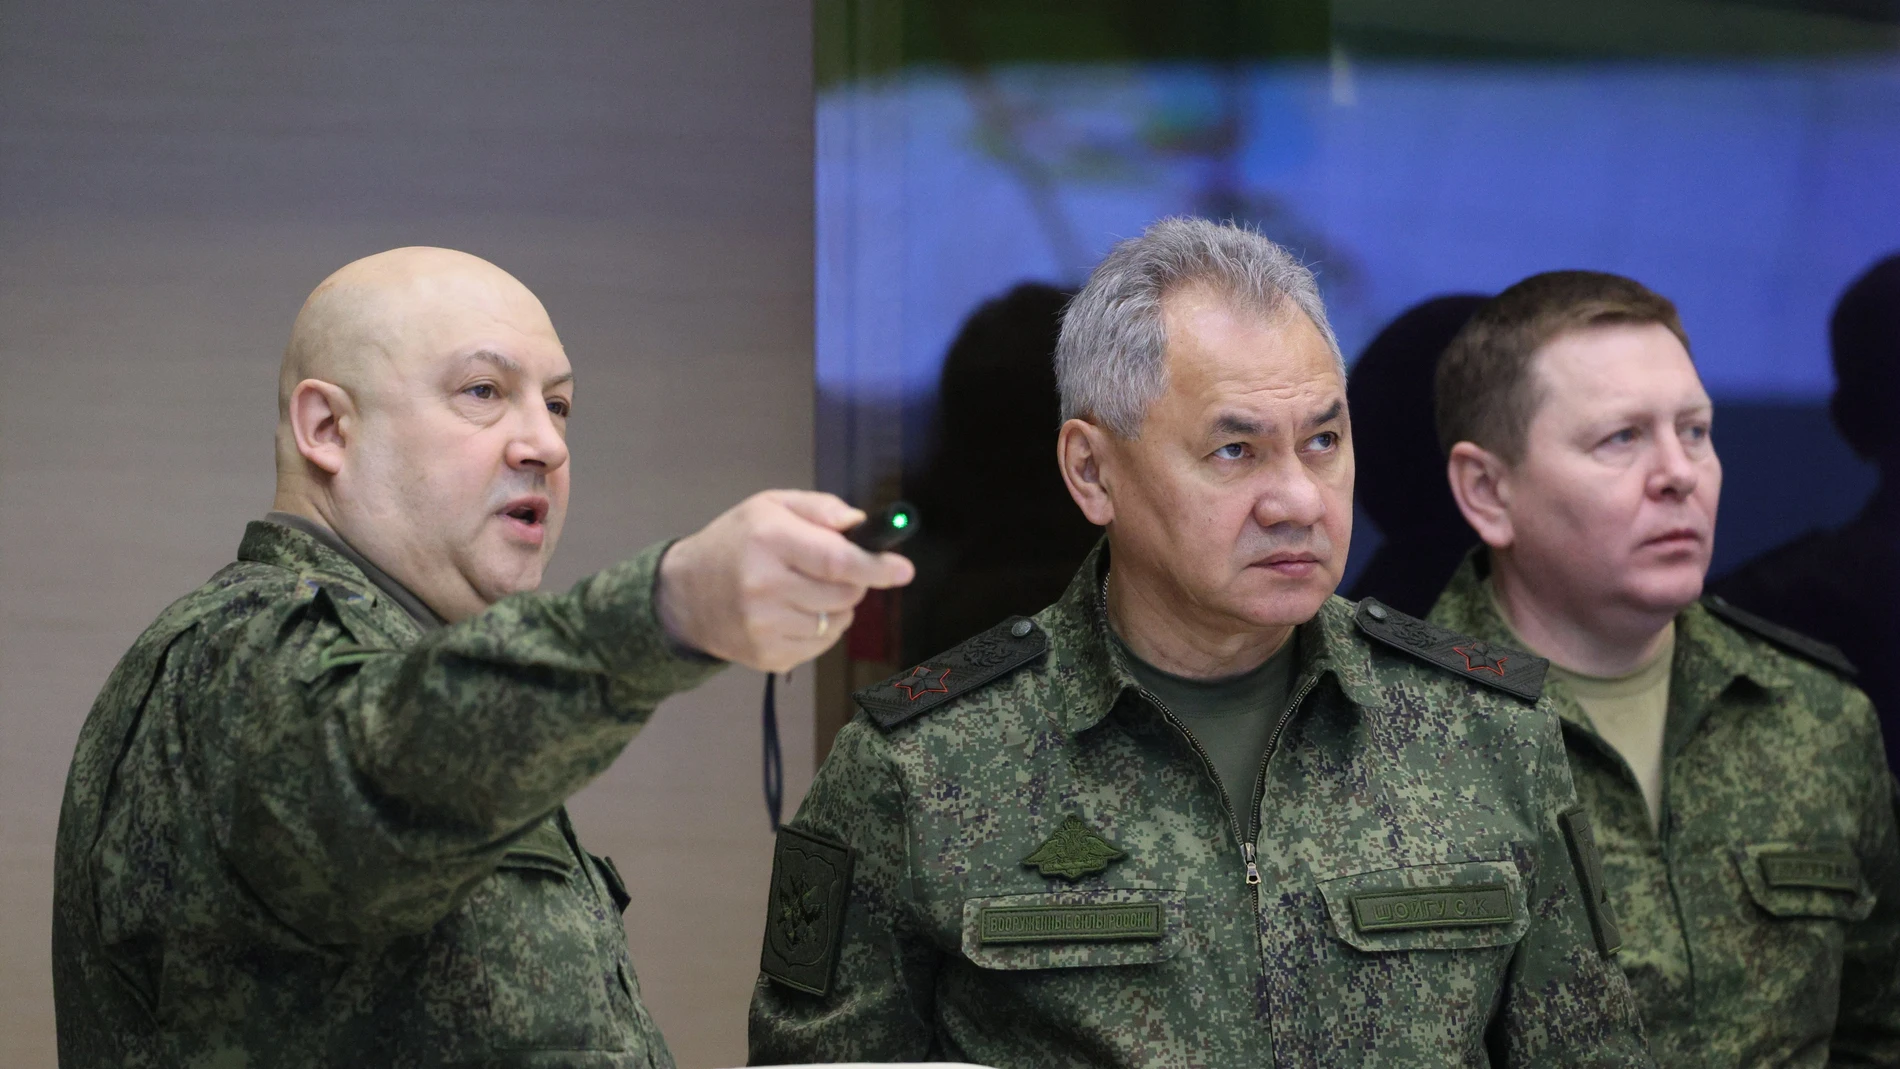 General Sergei Surovikin (L), commander of Russia's military operation in Ukraine, and Russian Defence Minister Sergei Shoigu (C) during a visit by Russian President Putin to the joint headquarters of the military branches of the Russian armed forces involved in the 'special military operation' in Ukraine, at an undisclosed location in Russia.